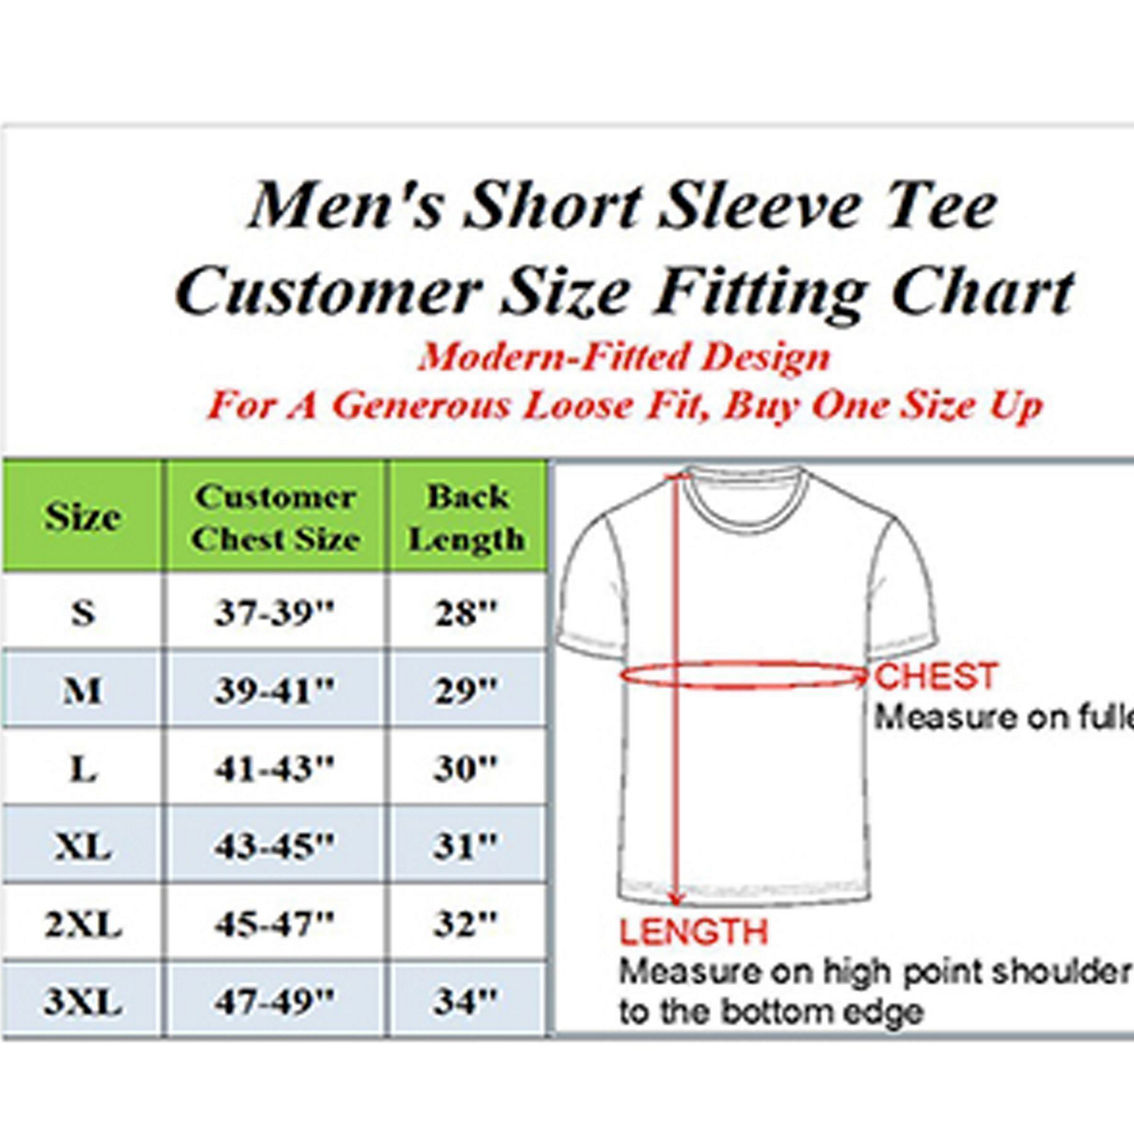 Blue Ice Men's Short Sleeve Crew Neck Classic T-shirt-6 Pack - Image 3 of 3